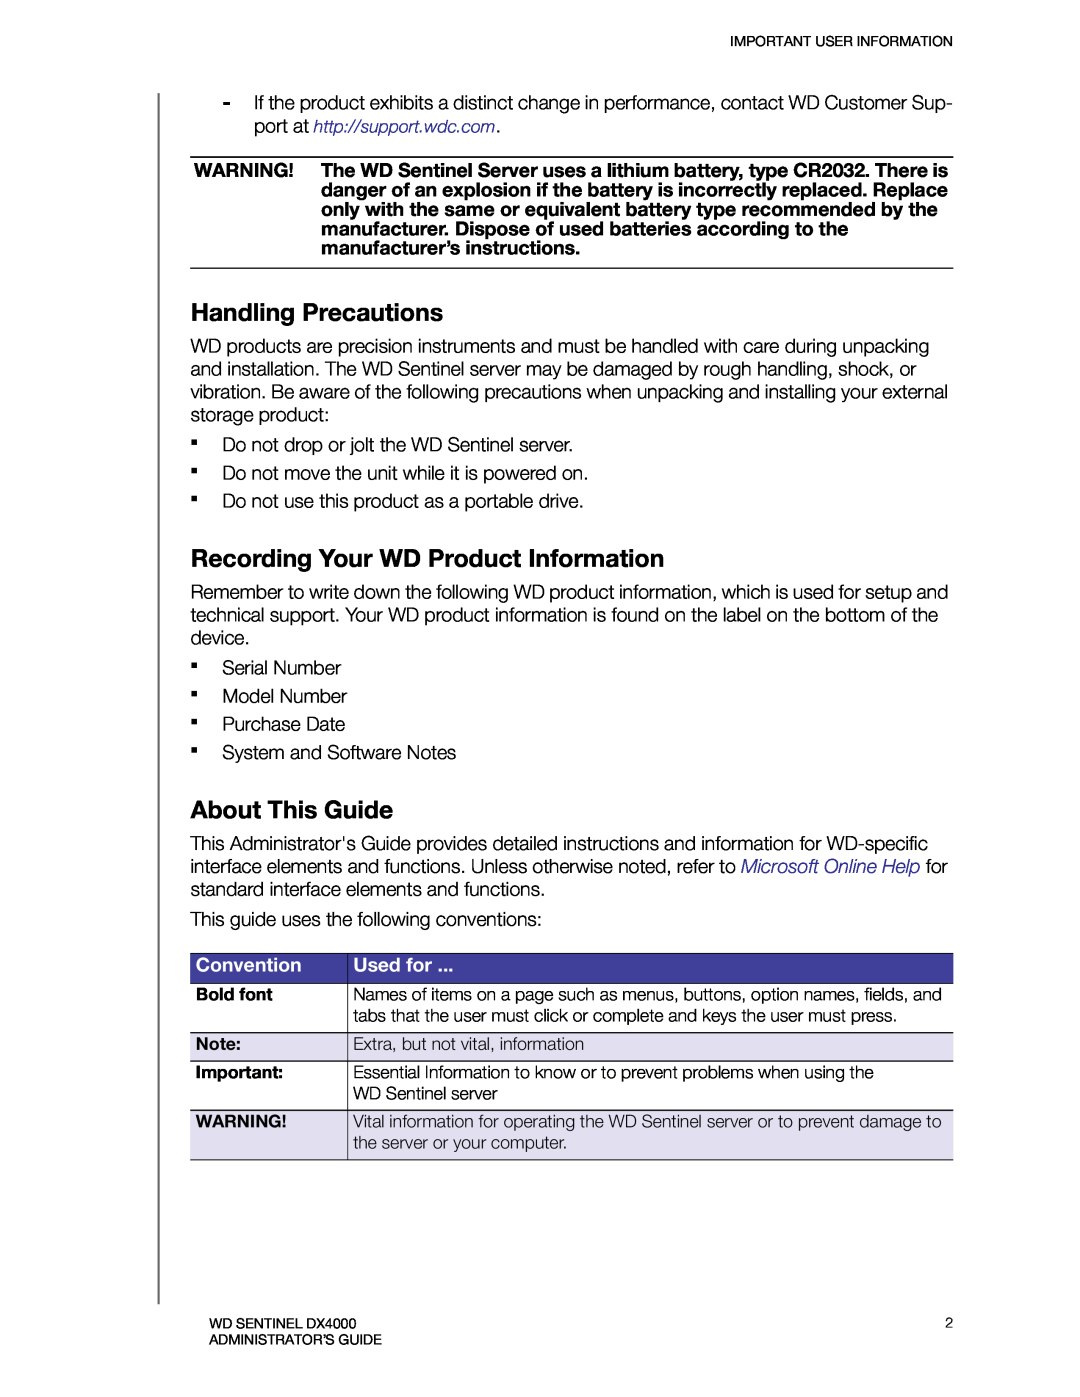 Western Digital WDBLGT0040KBK Handling Precautions, Recording Your WD Product Information, About This Guide, Convention 